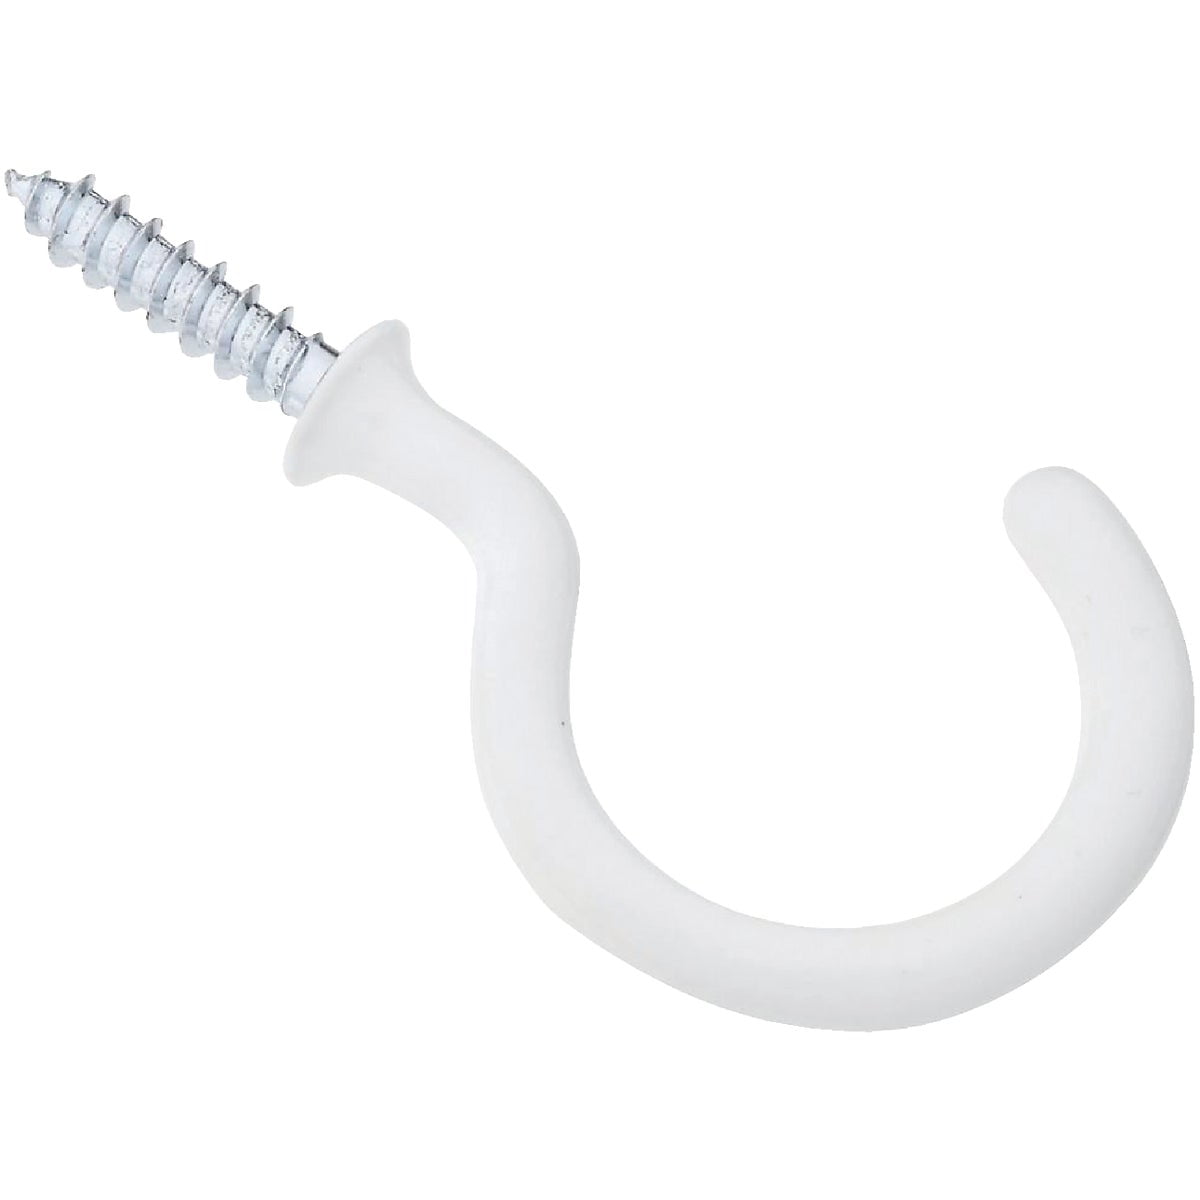 Screw In Shouldered Dresser Cup Hooks 1" 1 1/2" and 2"  White PVC Coated Hook 